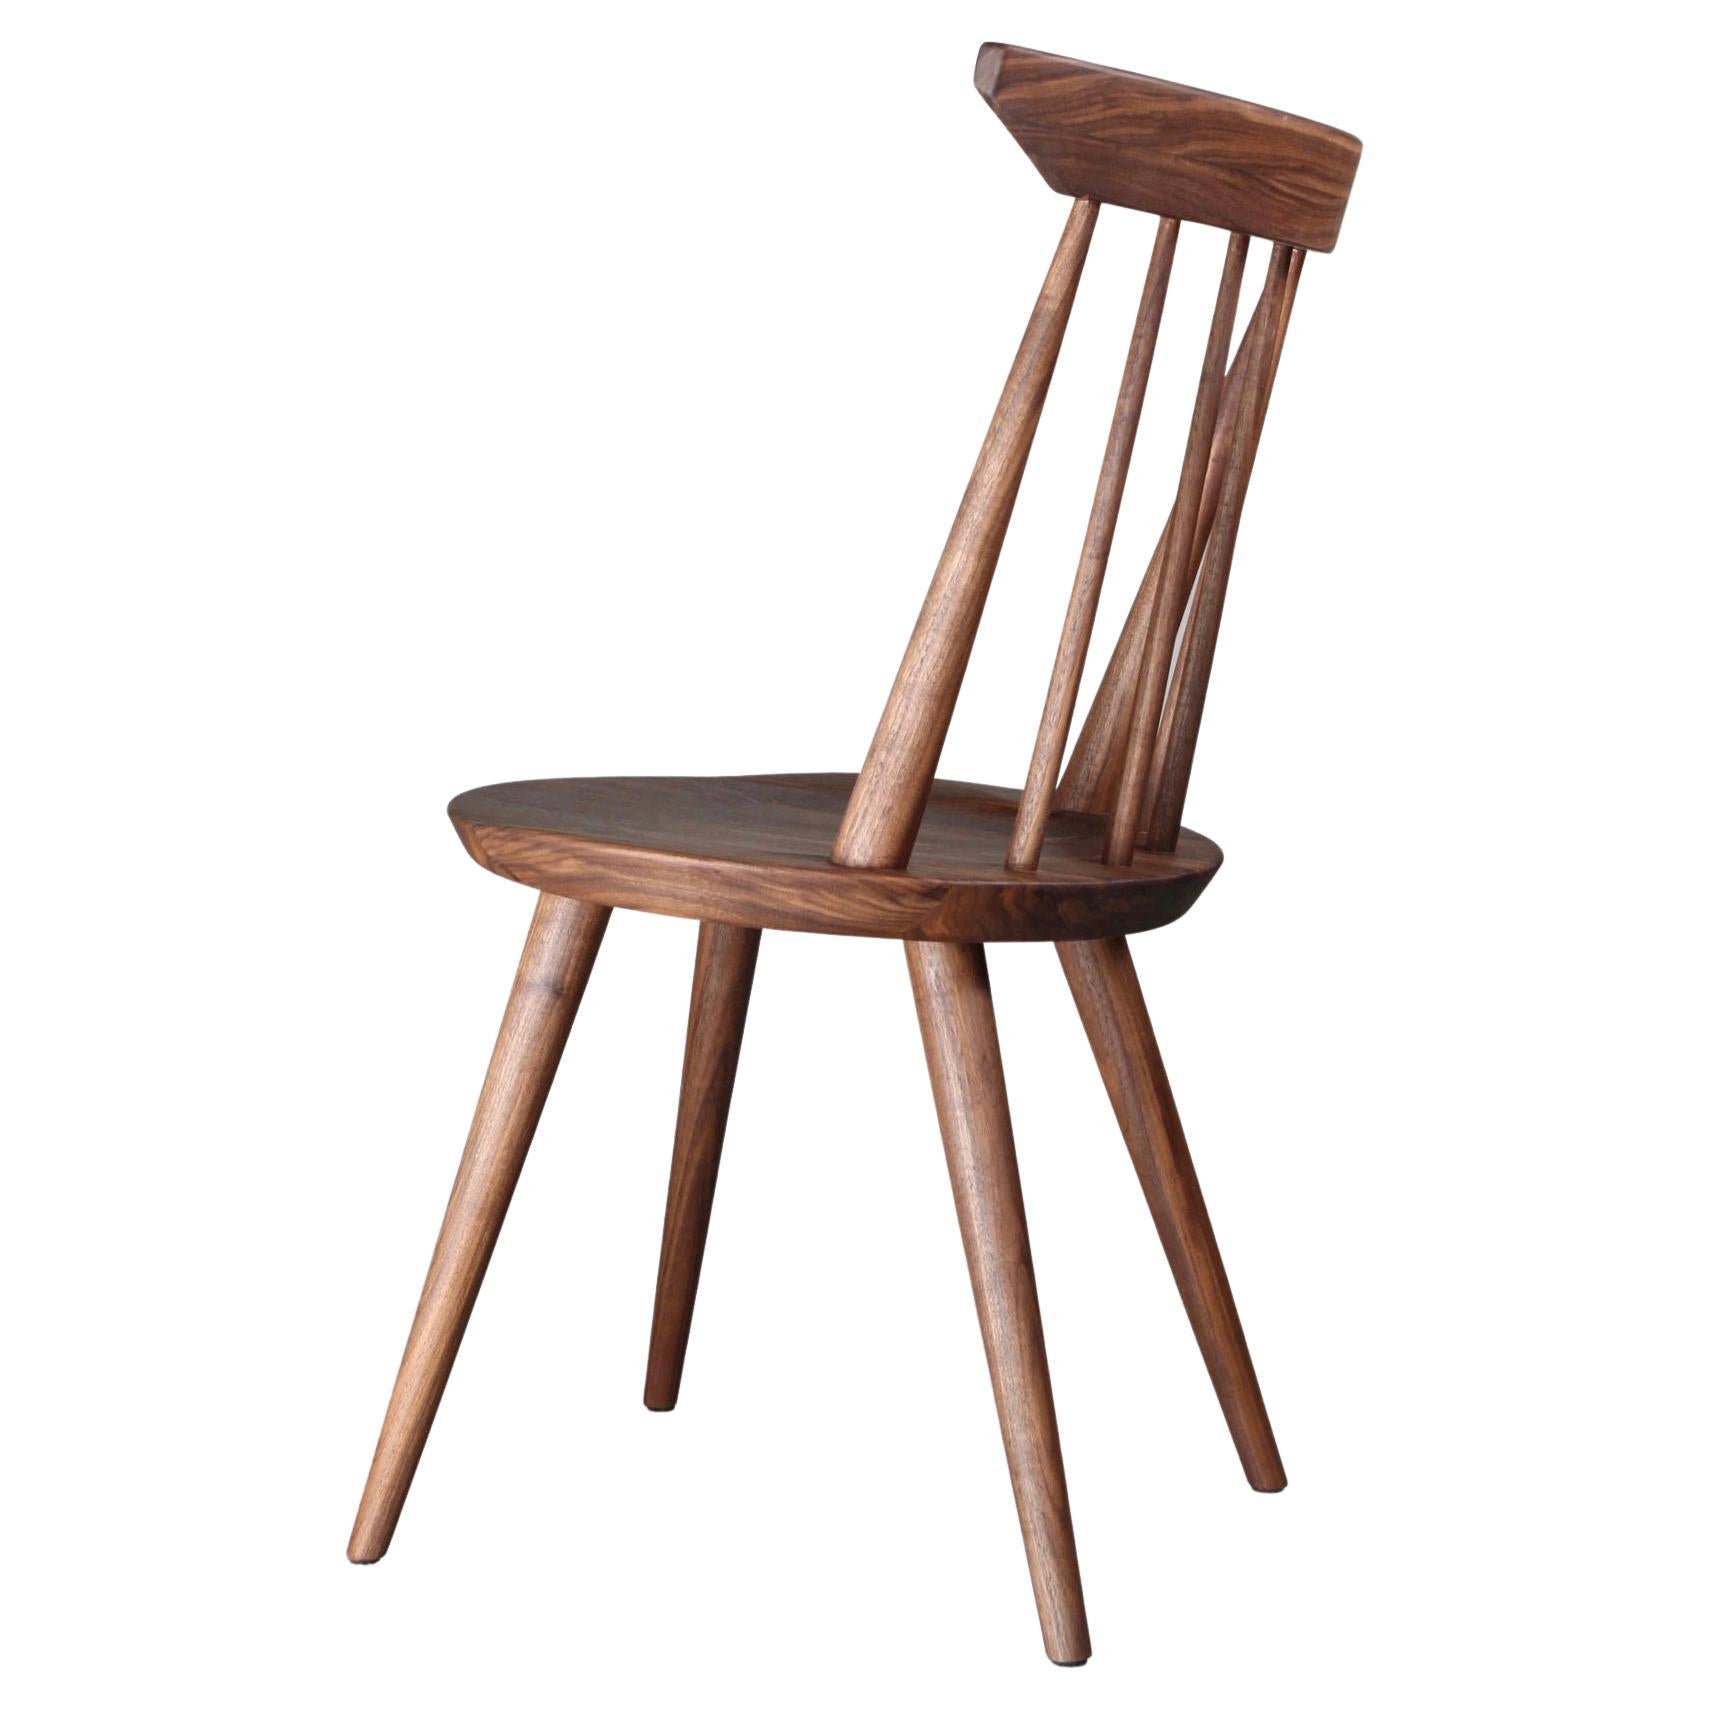 Solid Wood Windsor Style Dining Chair, Maple Wood Dining Chair Spindle Back